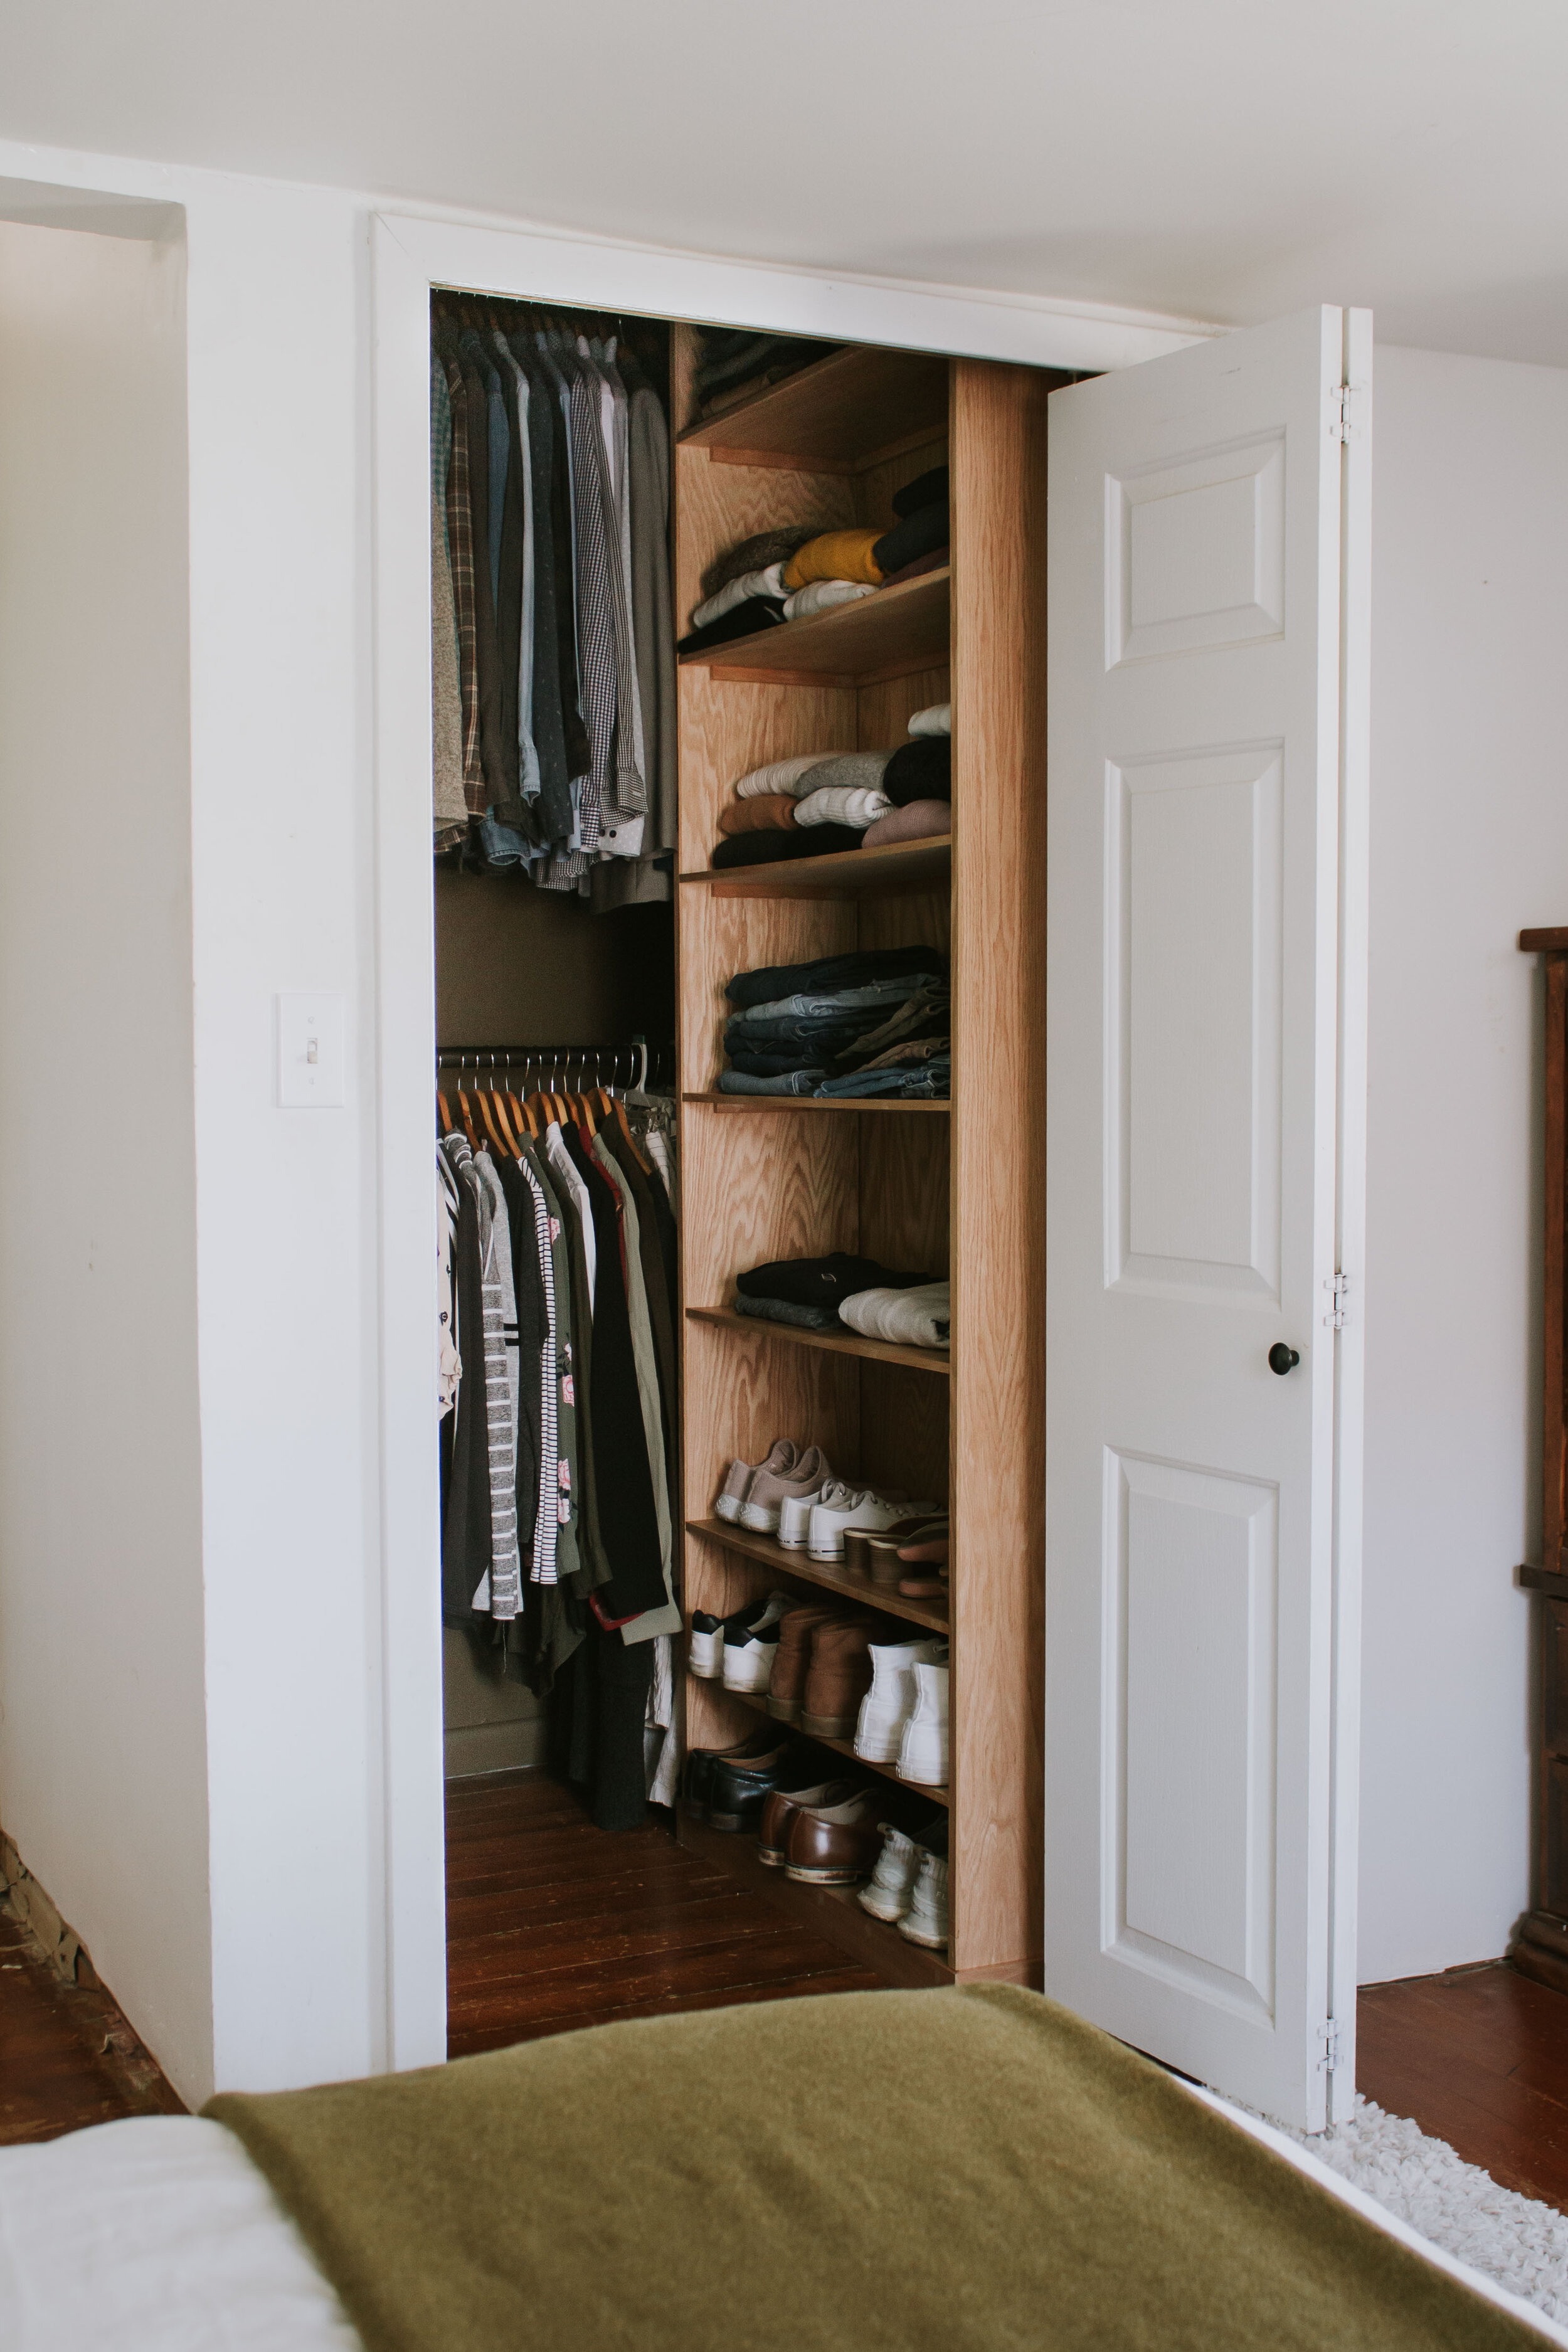 4 Day Closet Makeover - A quick organizational transformation by Nadine Stay. Walk in closet styling inspiration and DIY shelf organization. Closet Before and After Reveal!